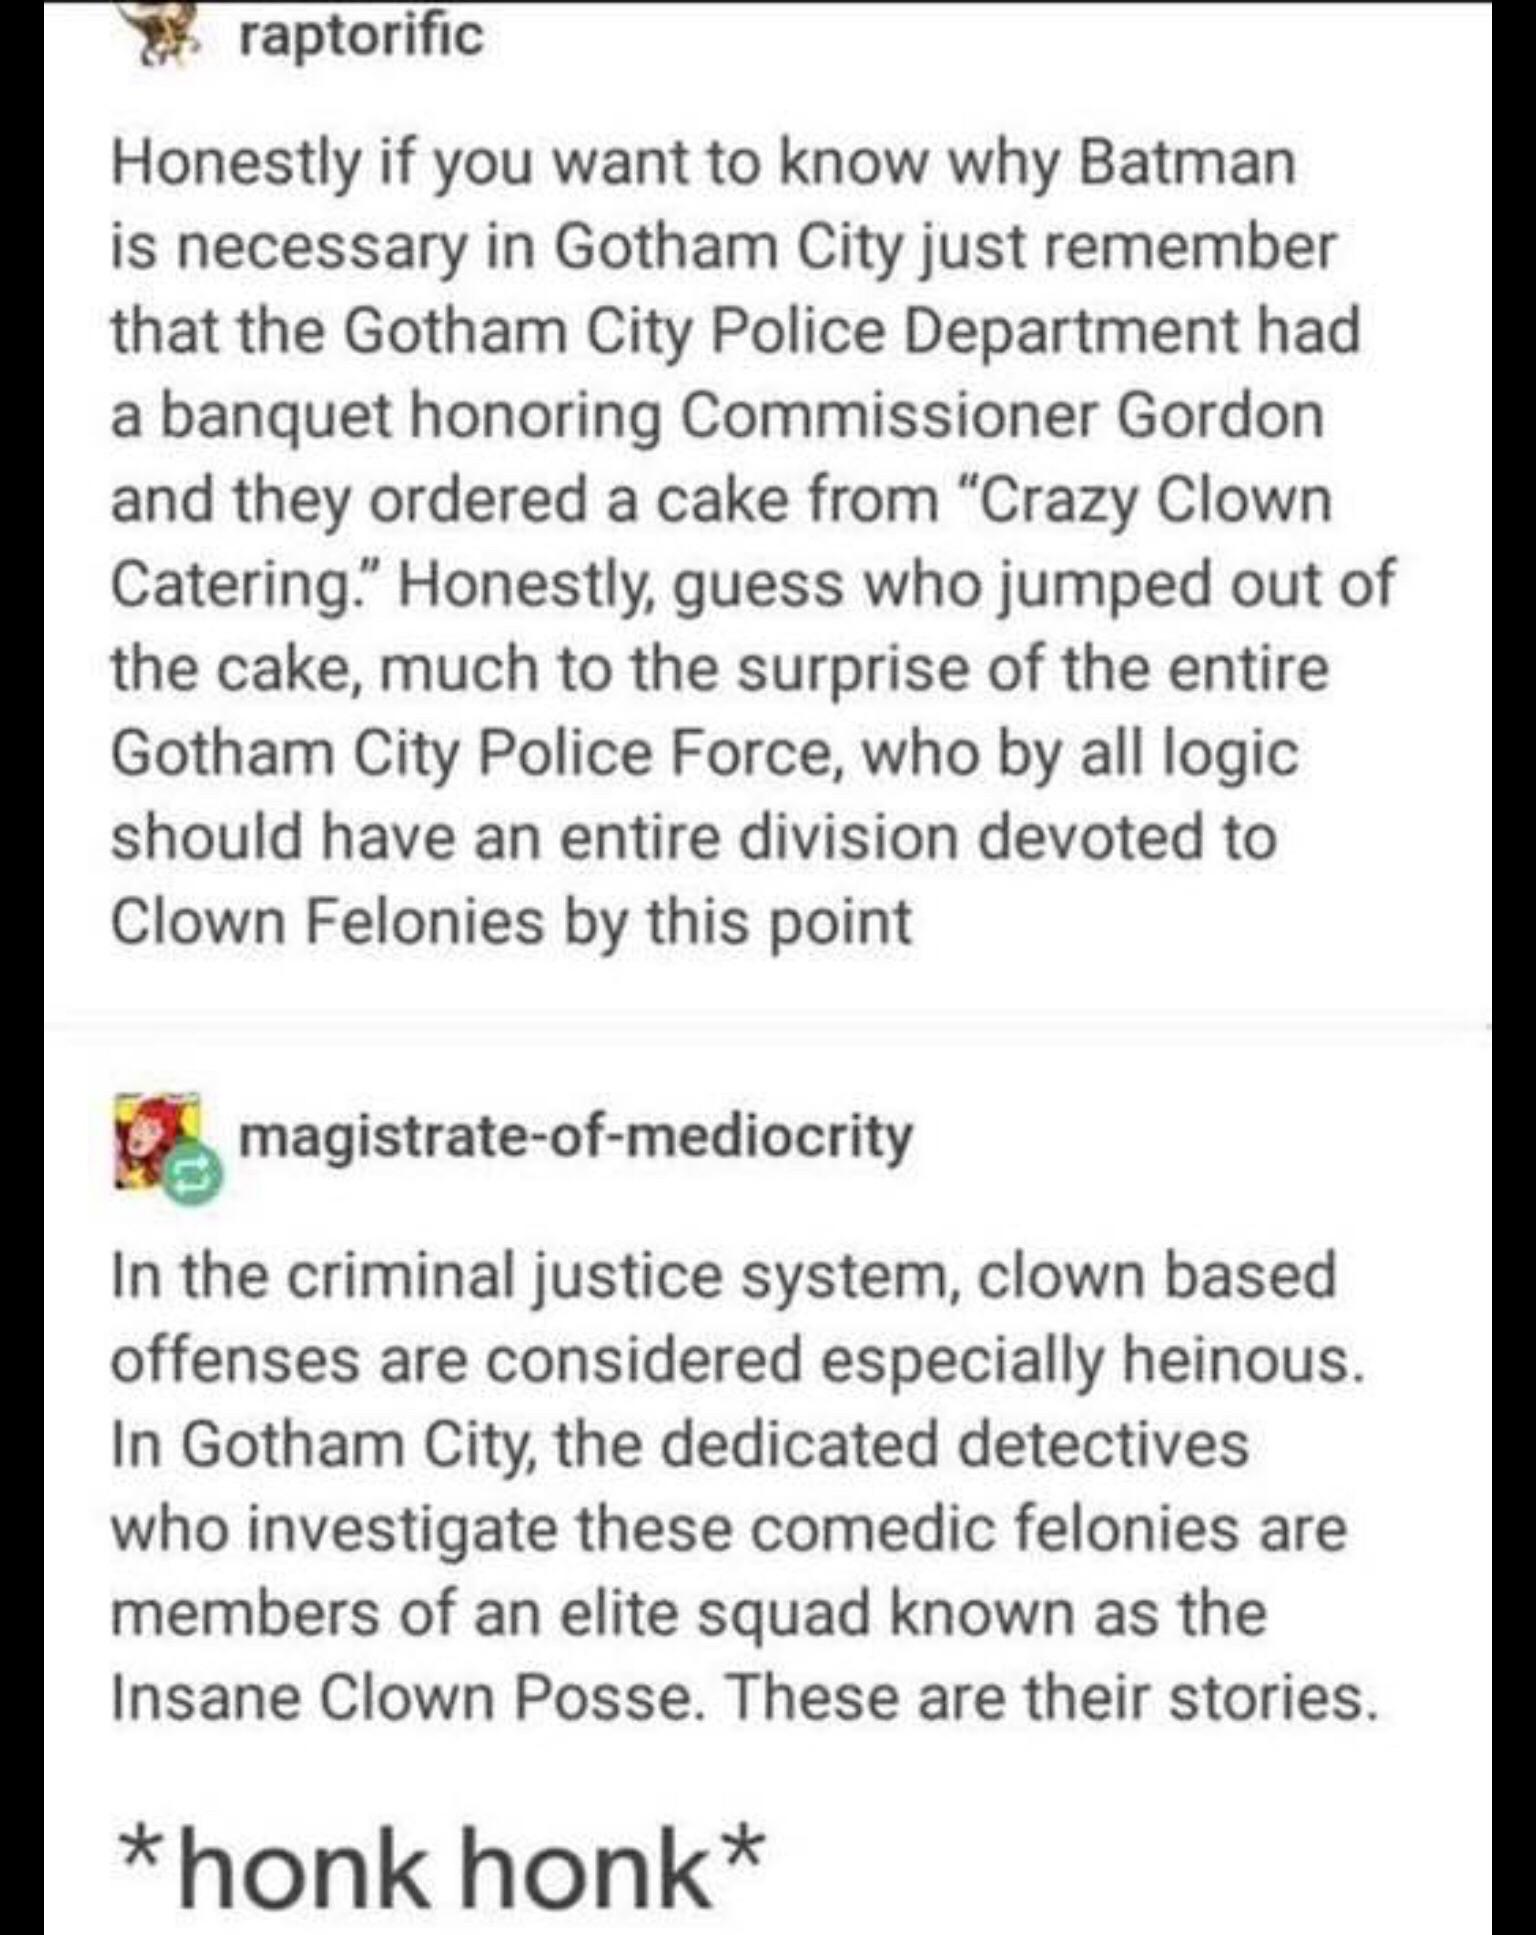 funny gaming memes and pics - insane clown posse's tumblr posts - raptorific Honestly if you want to know why Batman is necessary in Gotham City just remember that the Gotham City Police Department had a banquet honoring Commissioner Gordon and they order